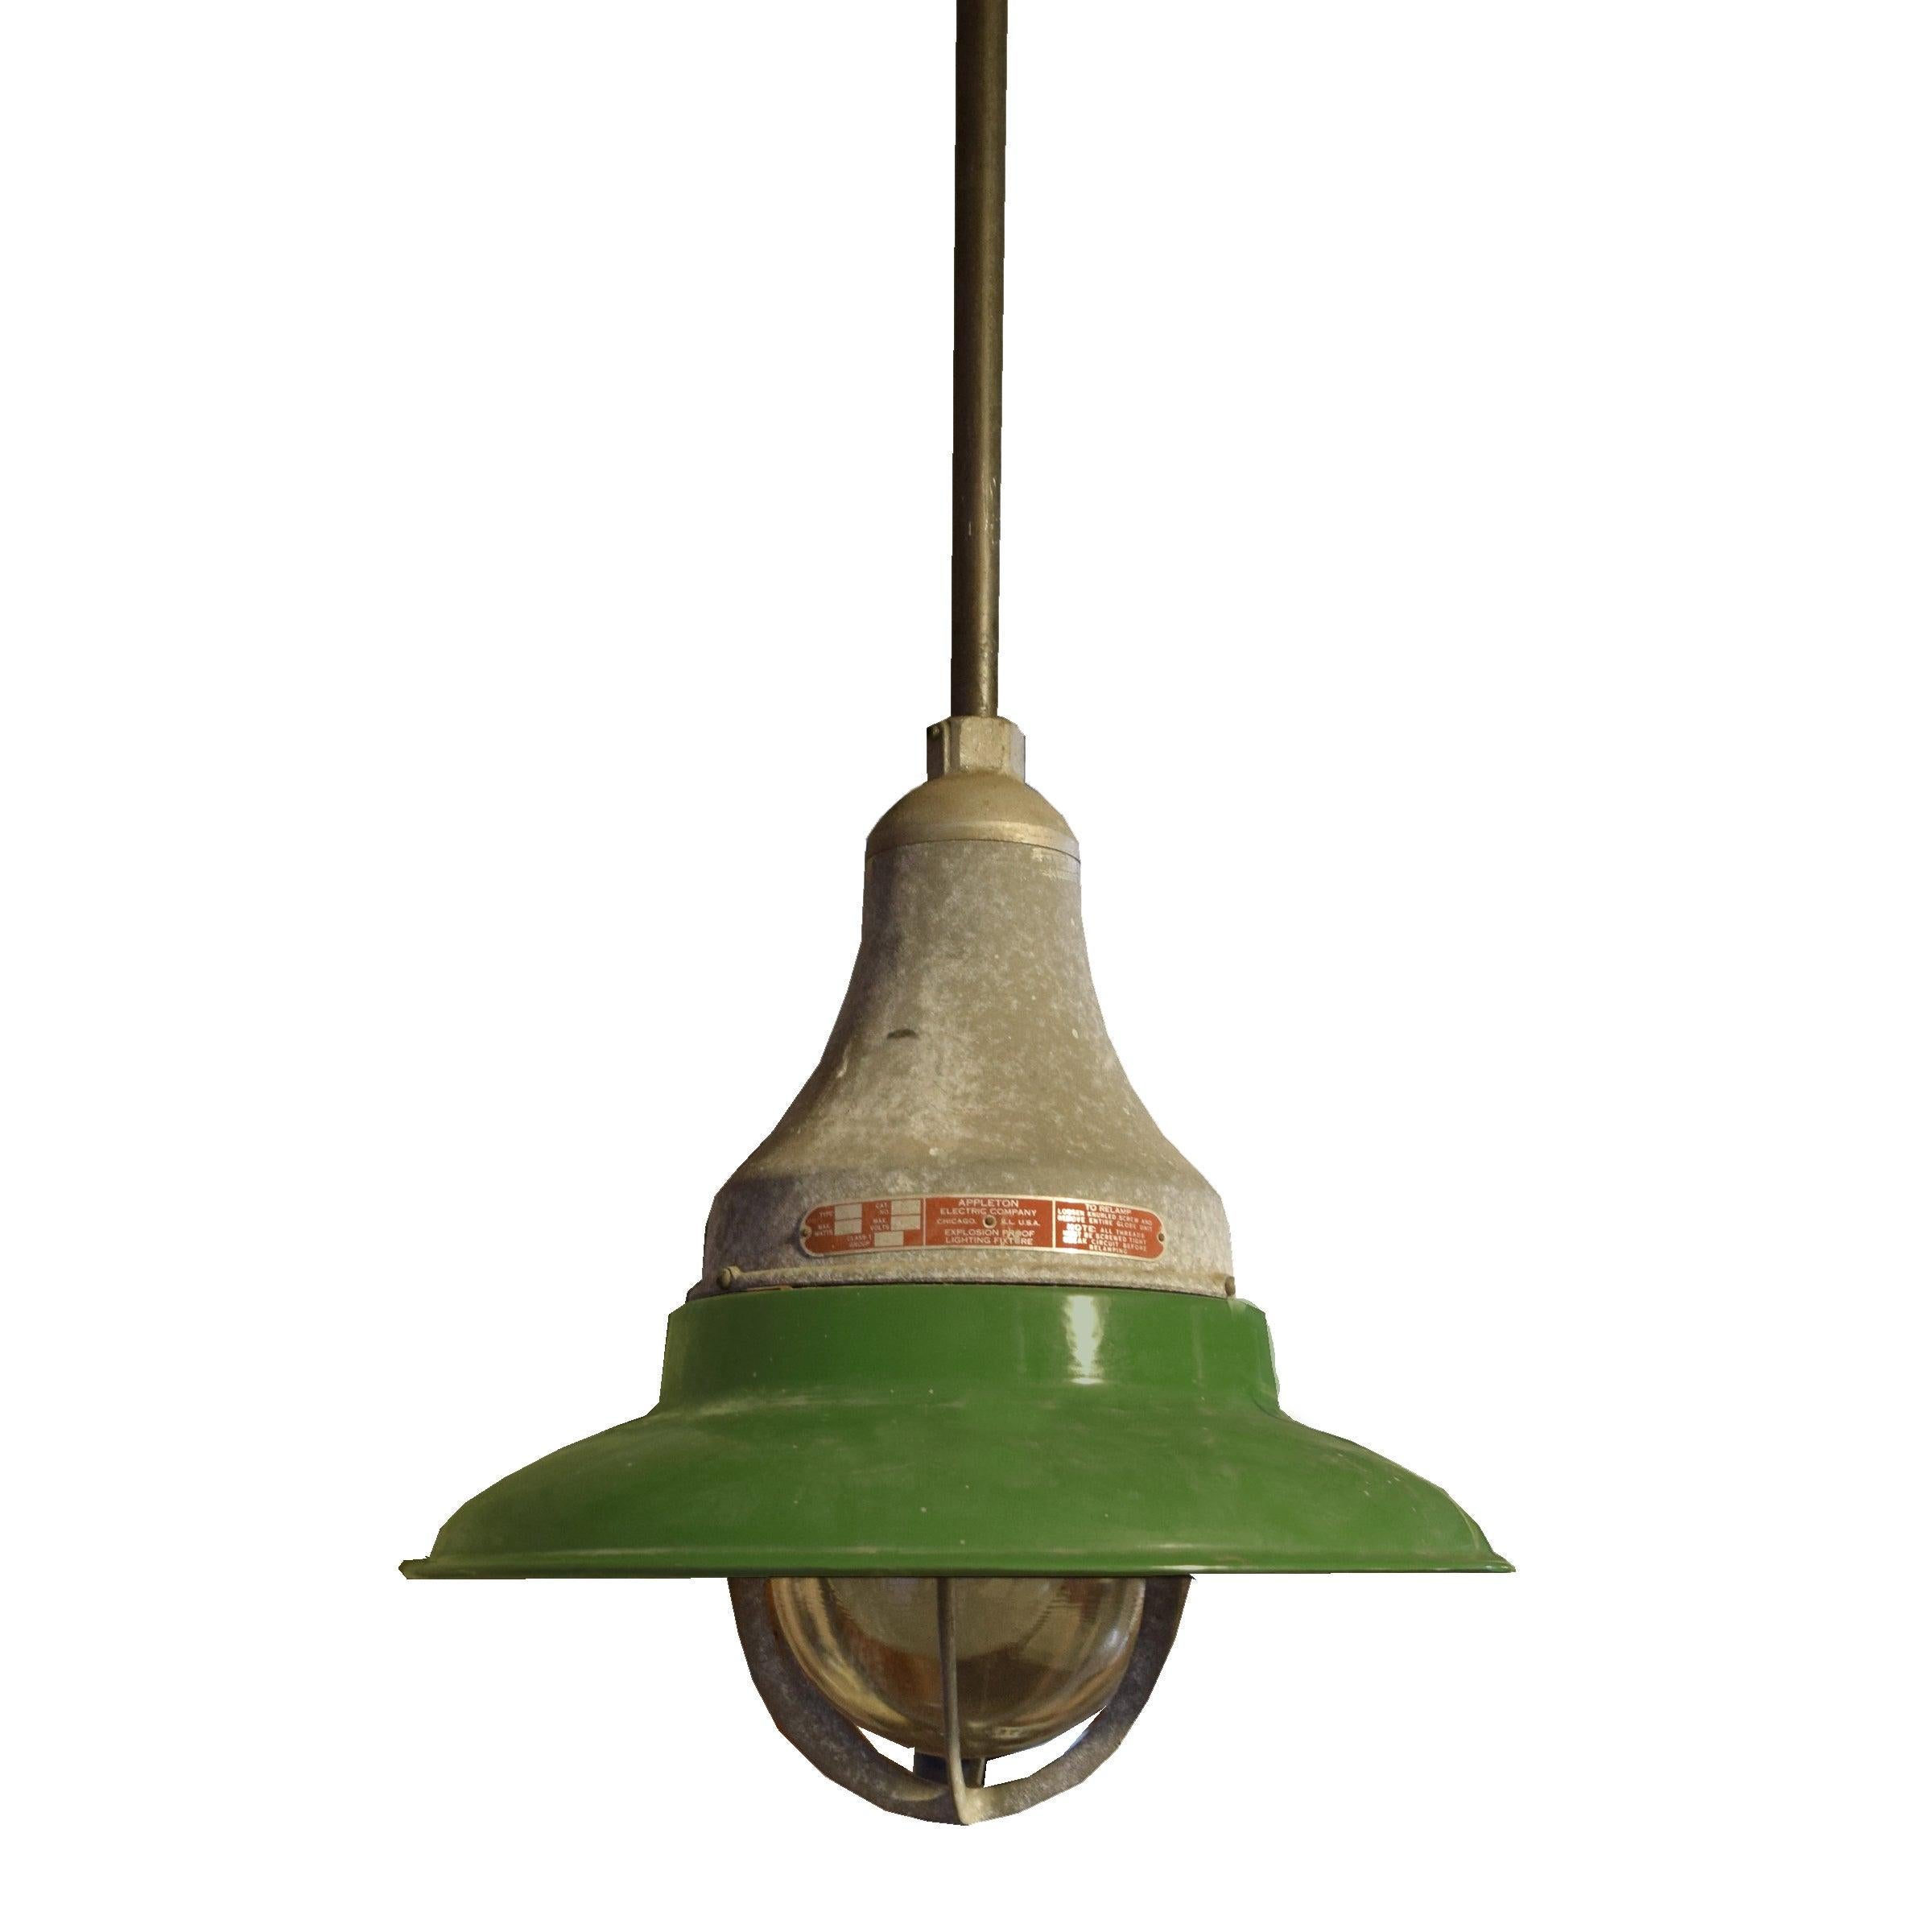 Enamel Mid-20th Century American Industrial Explosion Proof Light Fixture For Sale